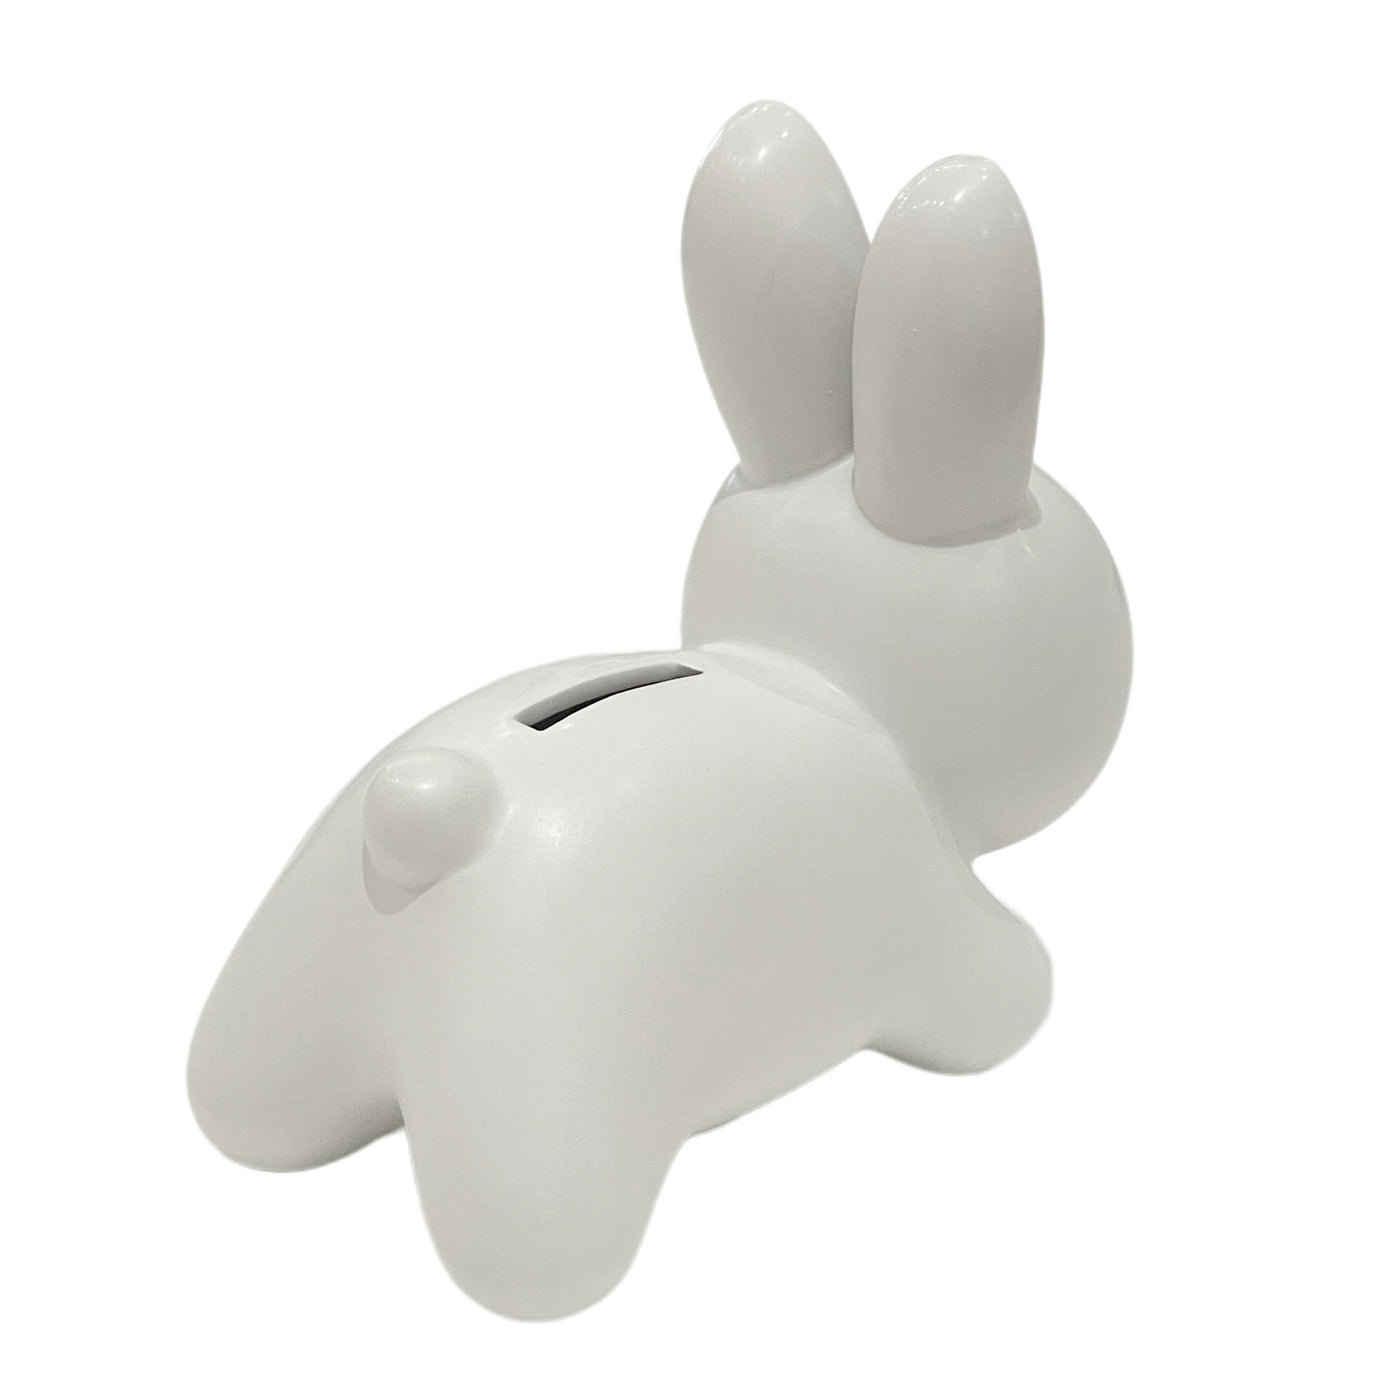 Miffy Leaping Porcelain Coin Bank Money Box